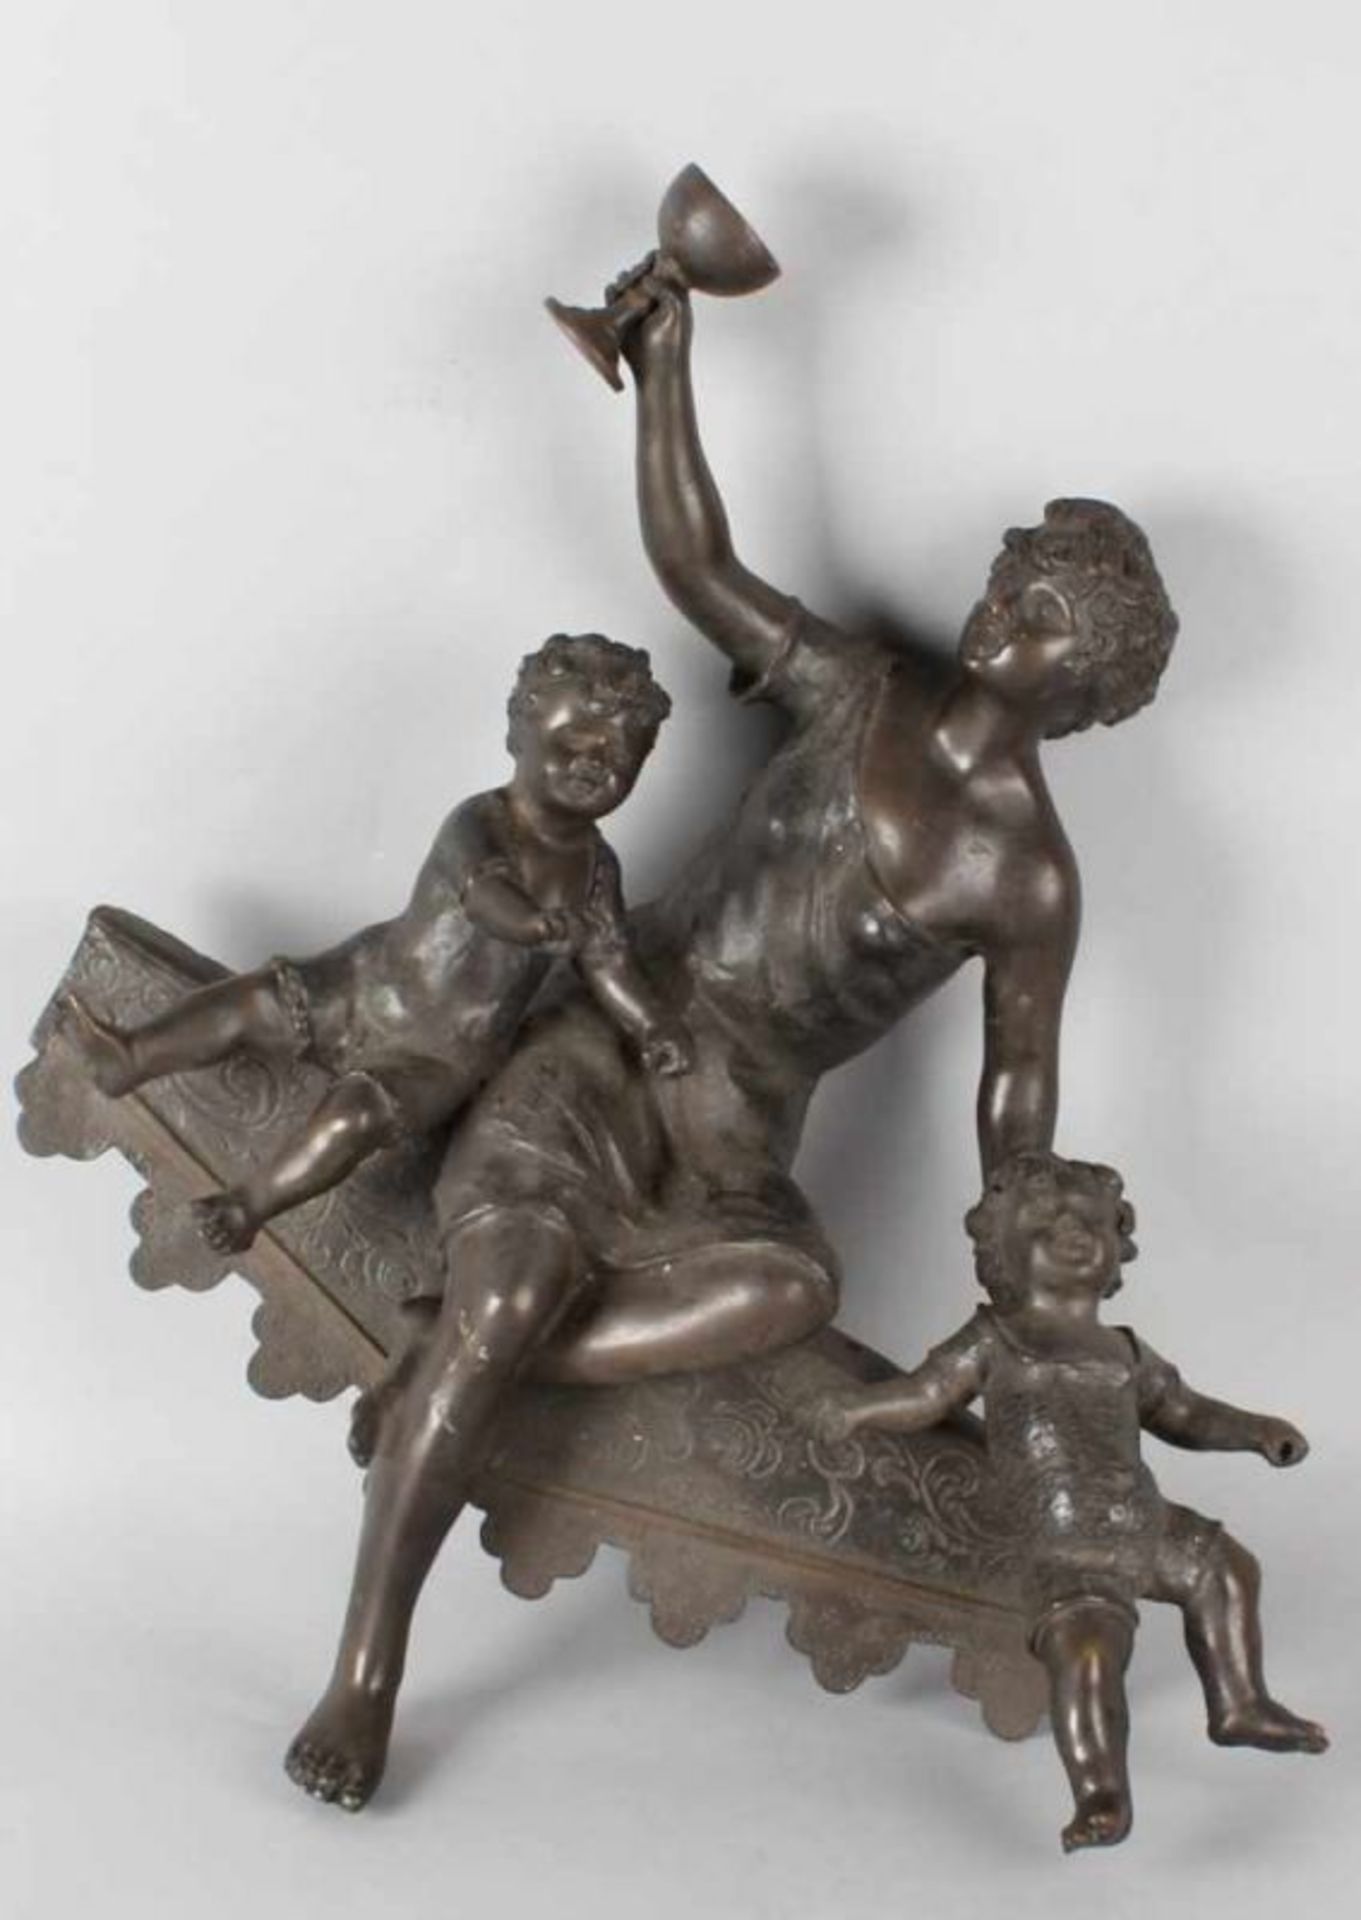 Great ancient bronze sculpture group, ca. 1870. Presentation of woman with vinkelk and two